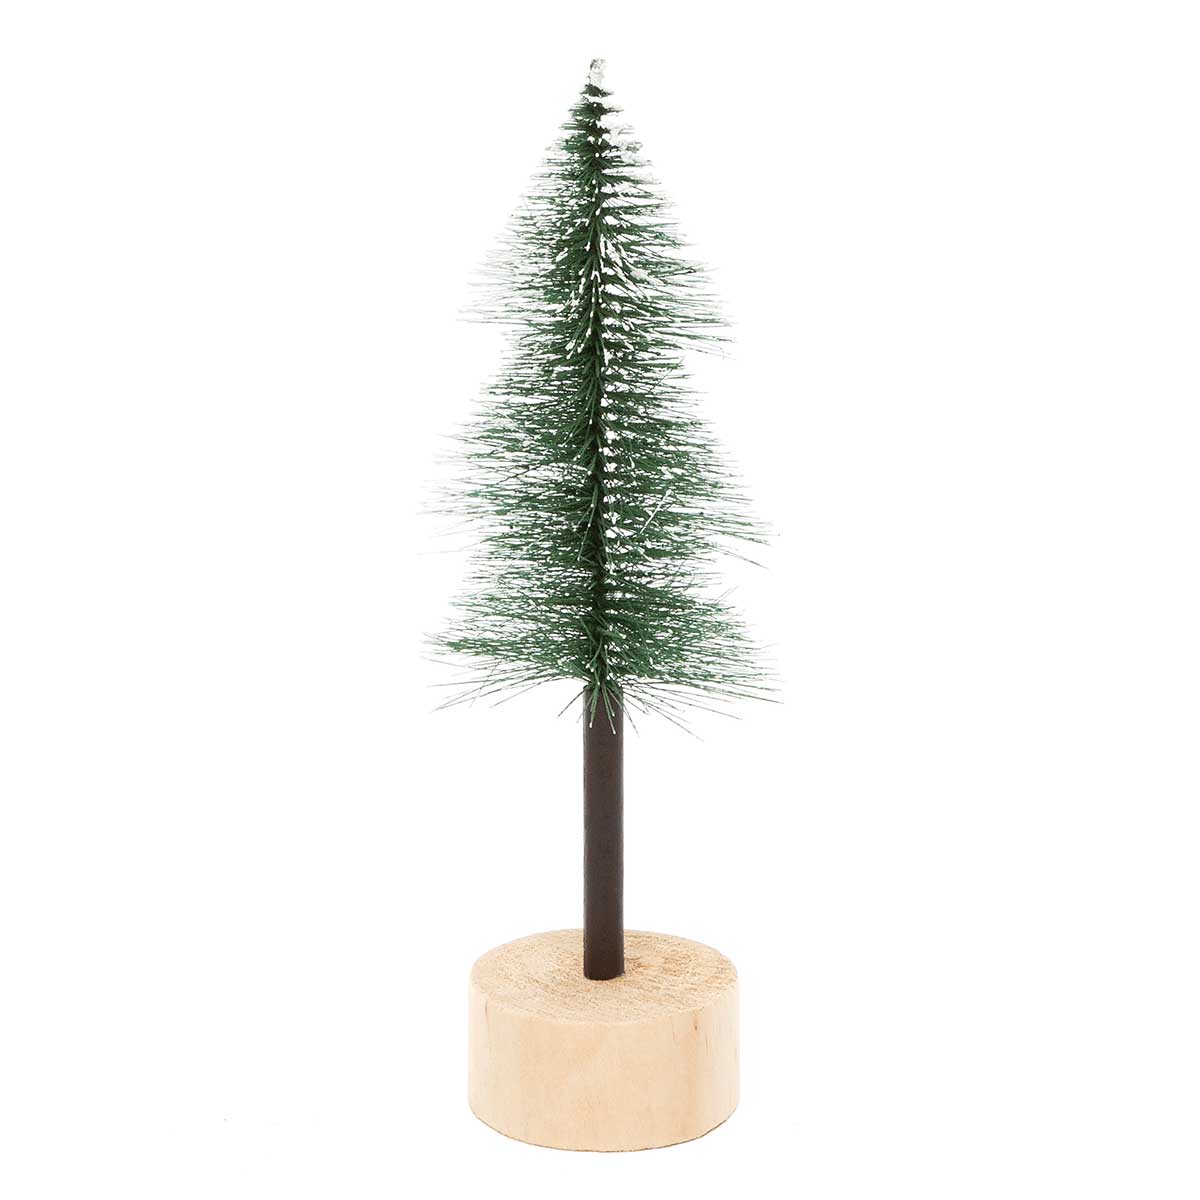 ALPINE BRISTLE TREE DARK GREEN WITH WOOD TRUNK AND BASE